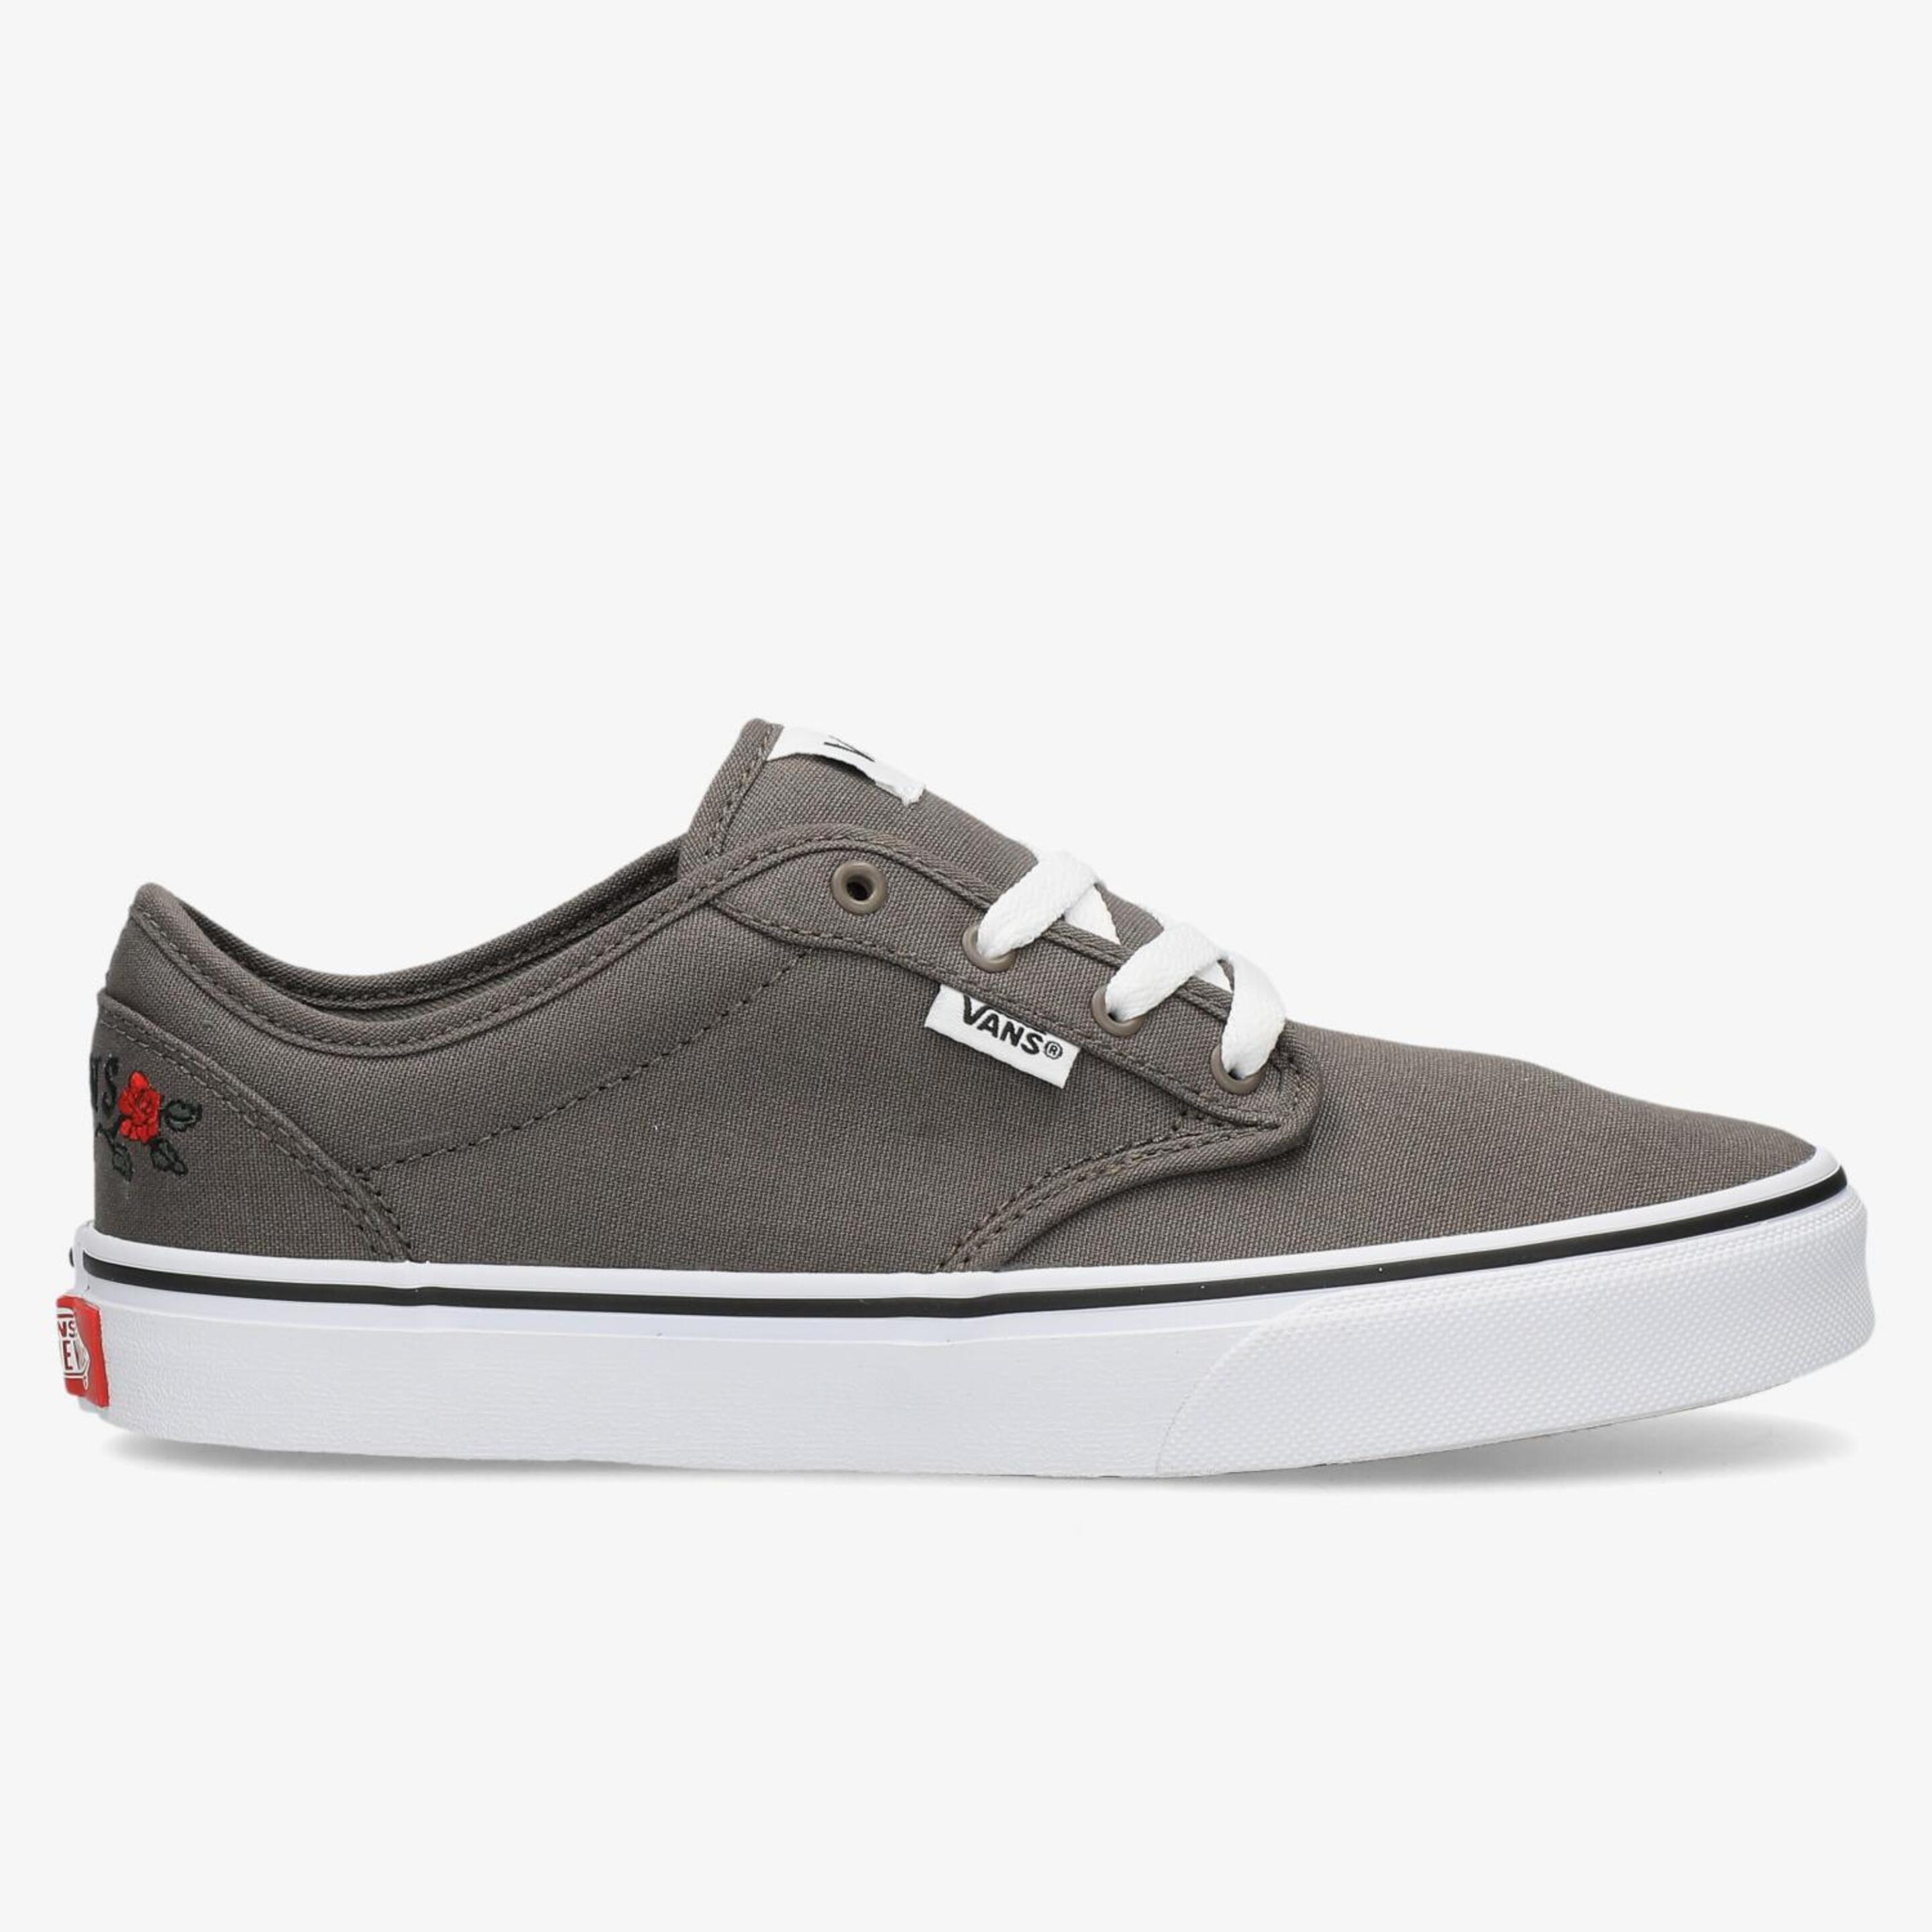 Vans Yt Atwood Embroidery - verde - Sapatilhas Lona Rapaz